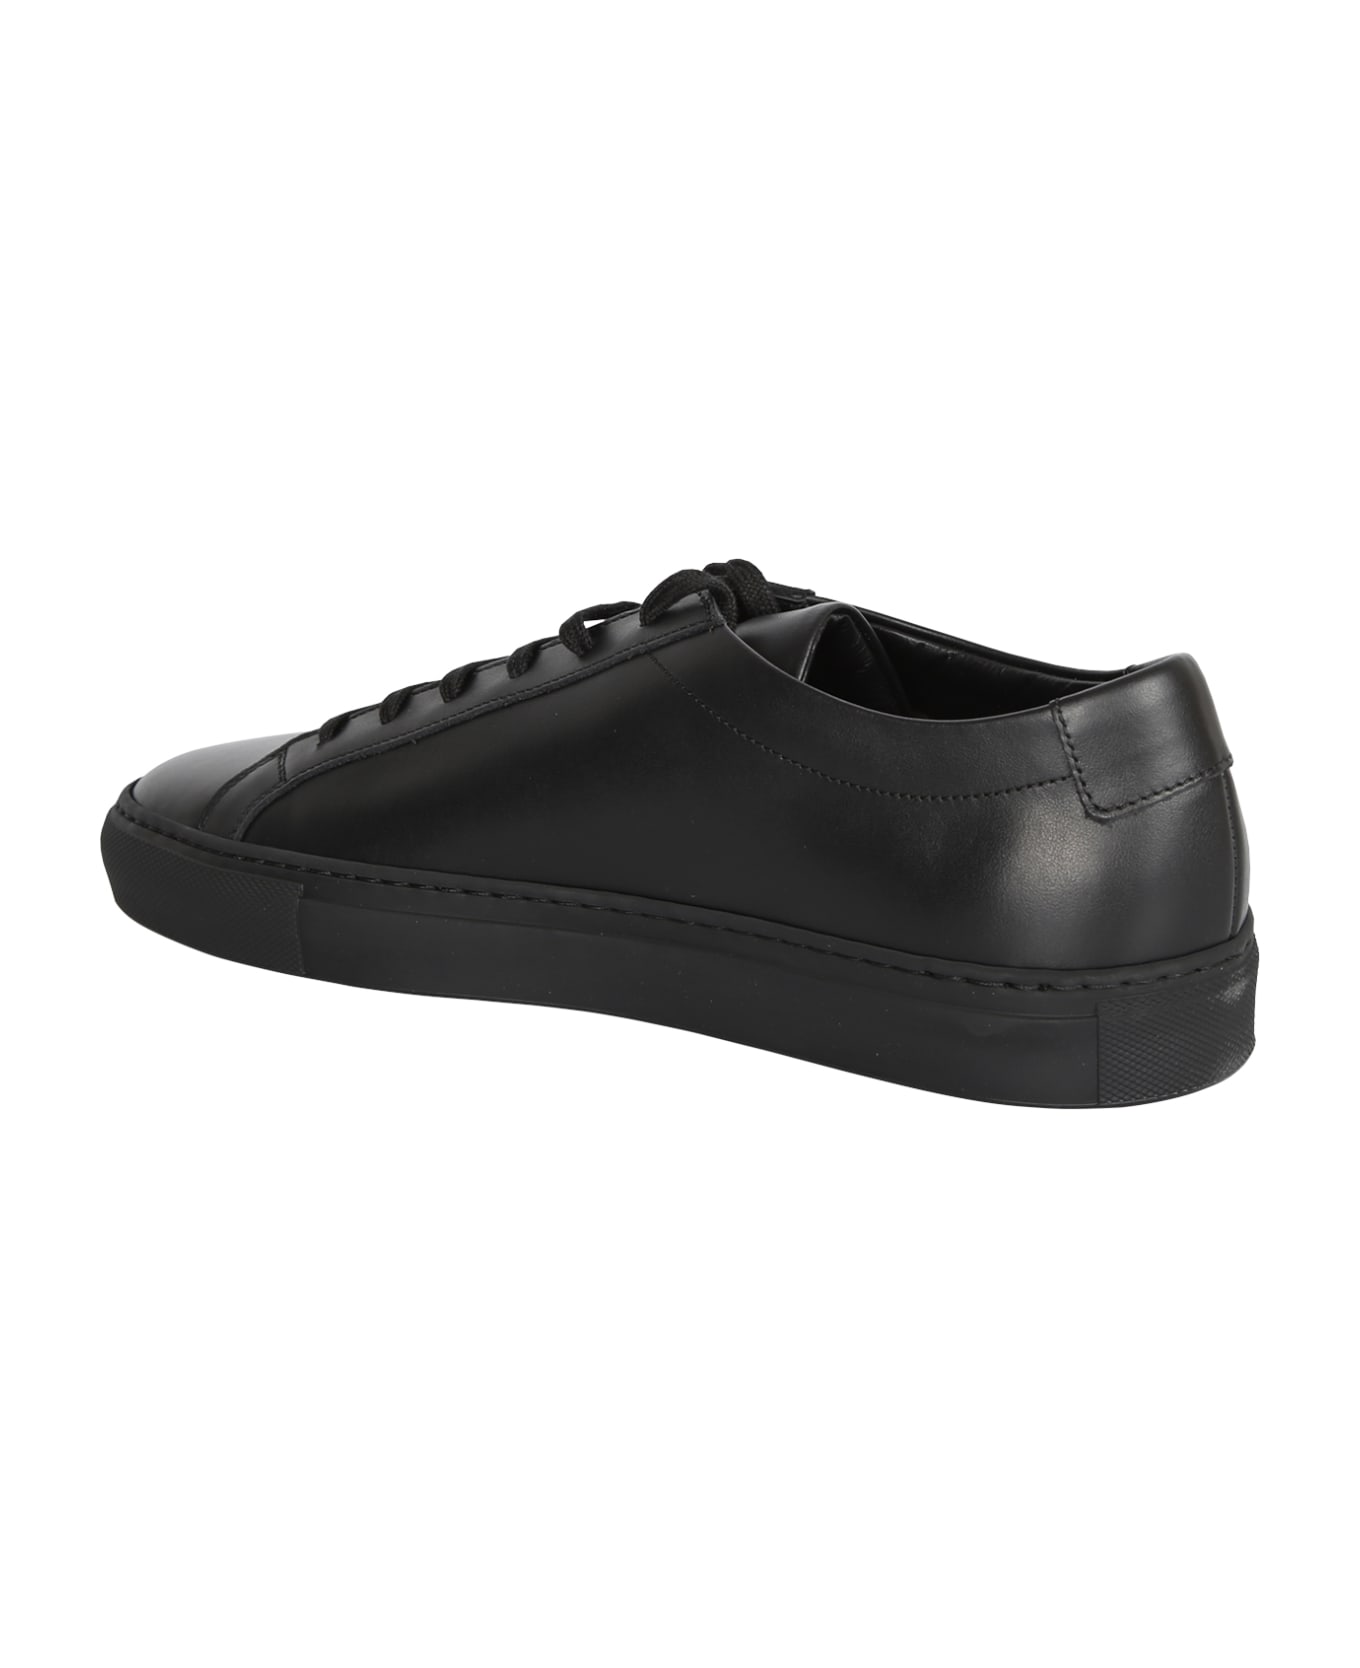 Common Projects Black Sneakers - Black